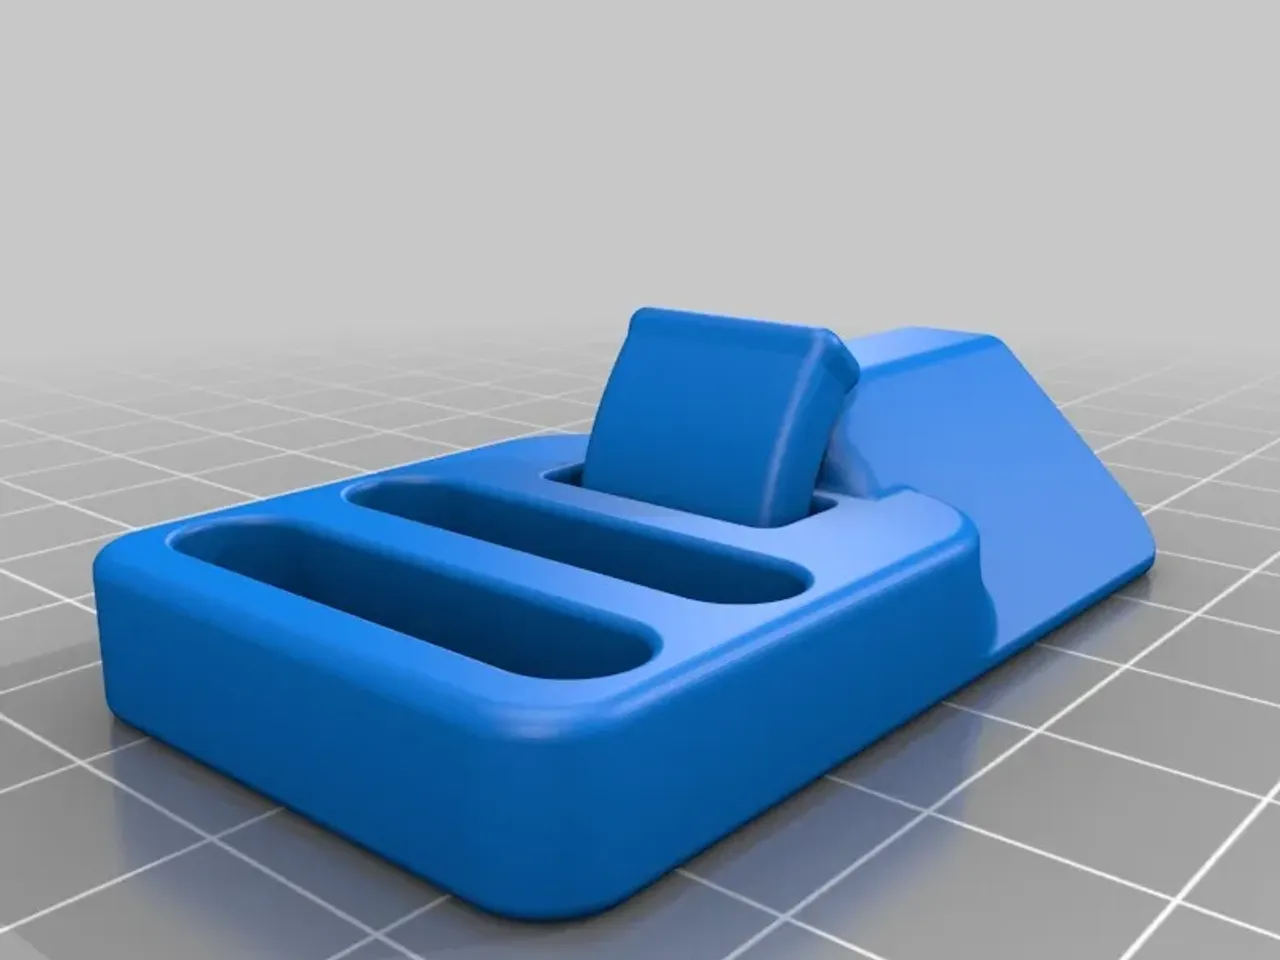 Buckle - 3D Print your own replacement by Proto3000 - Thingiverse